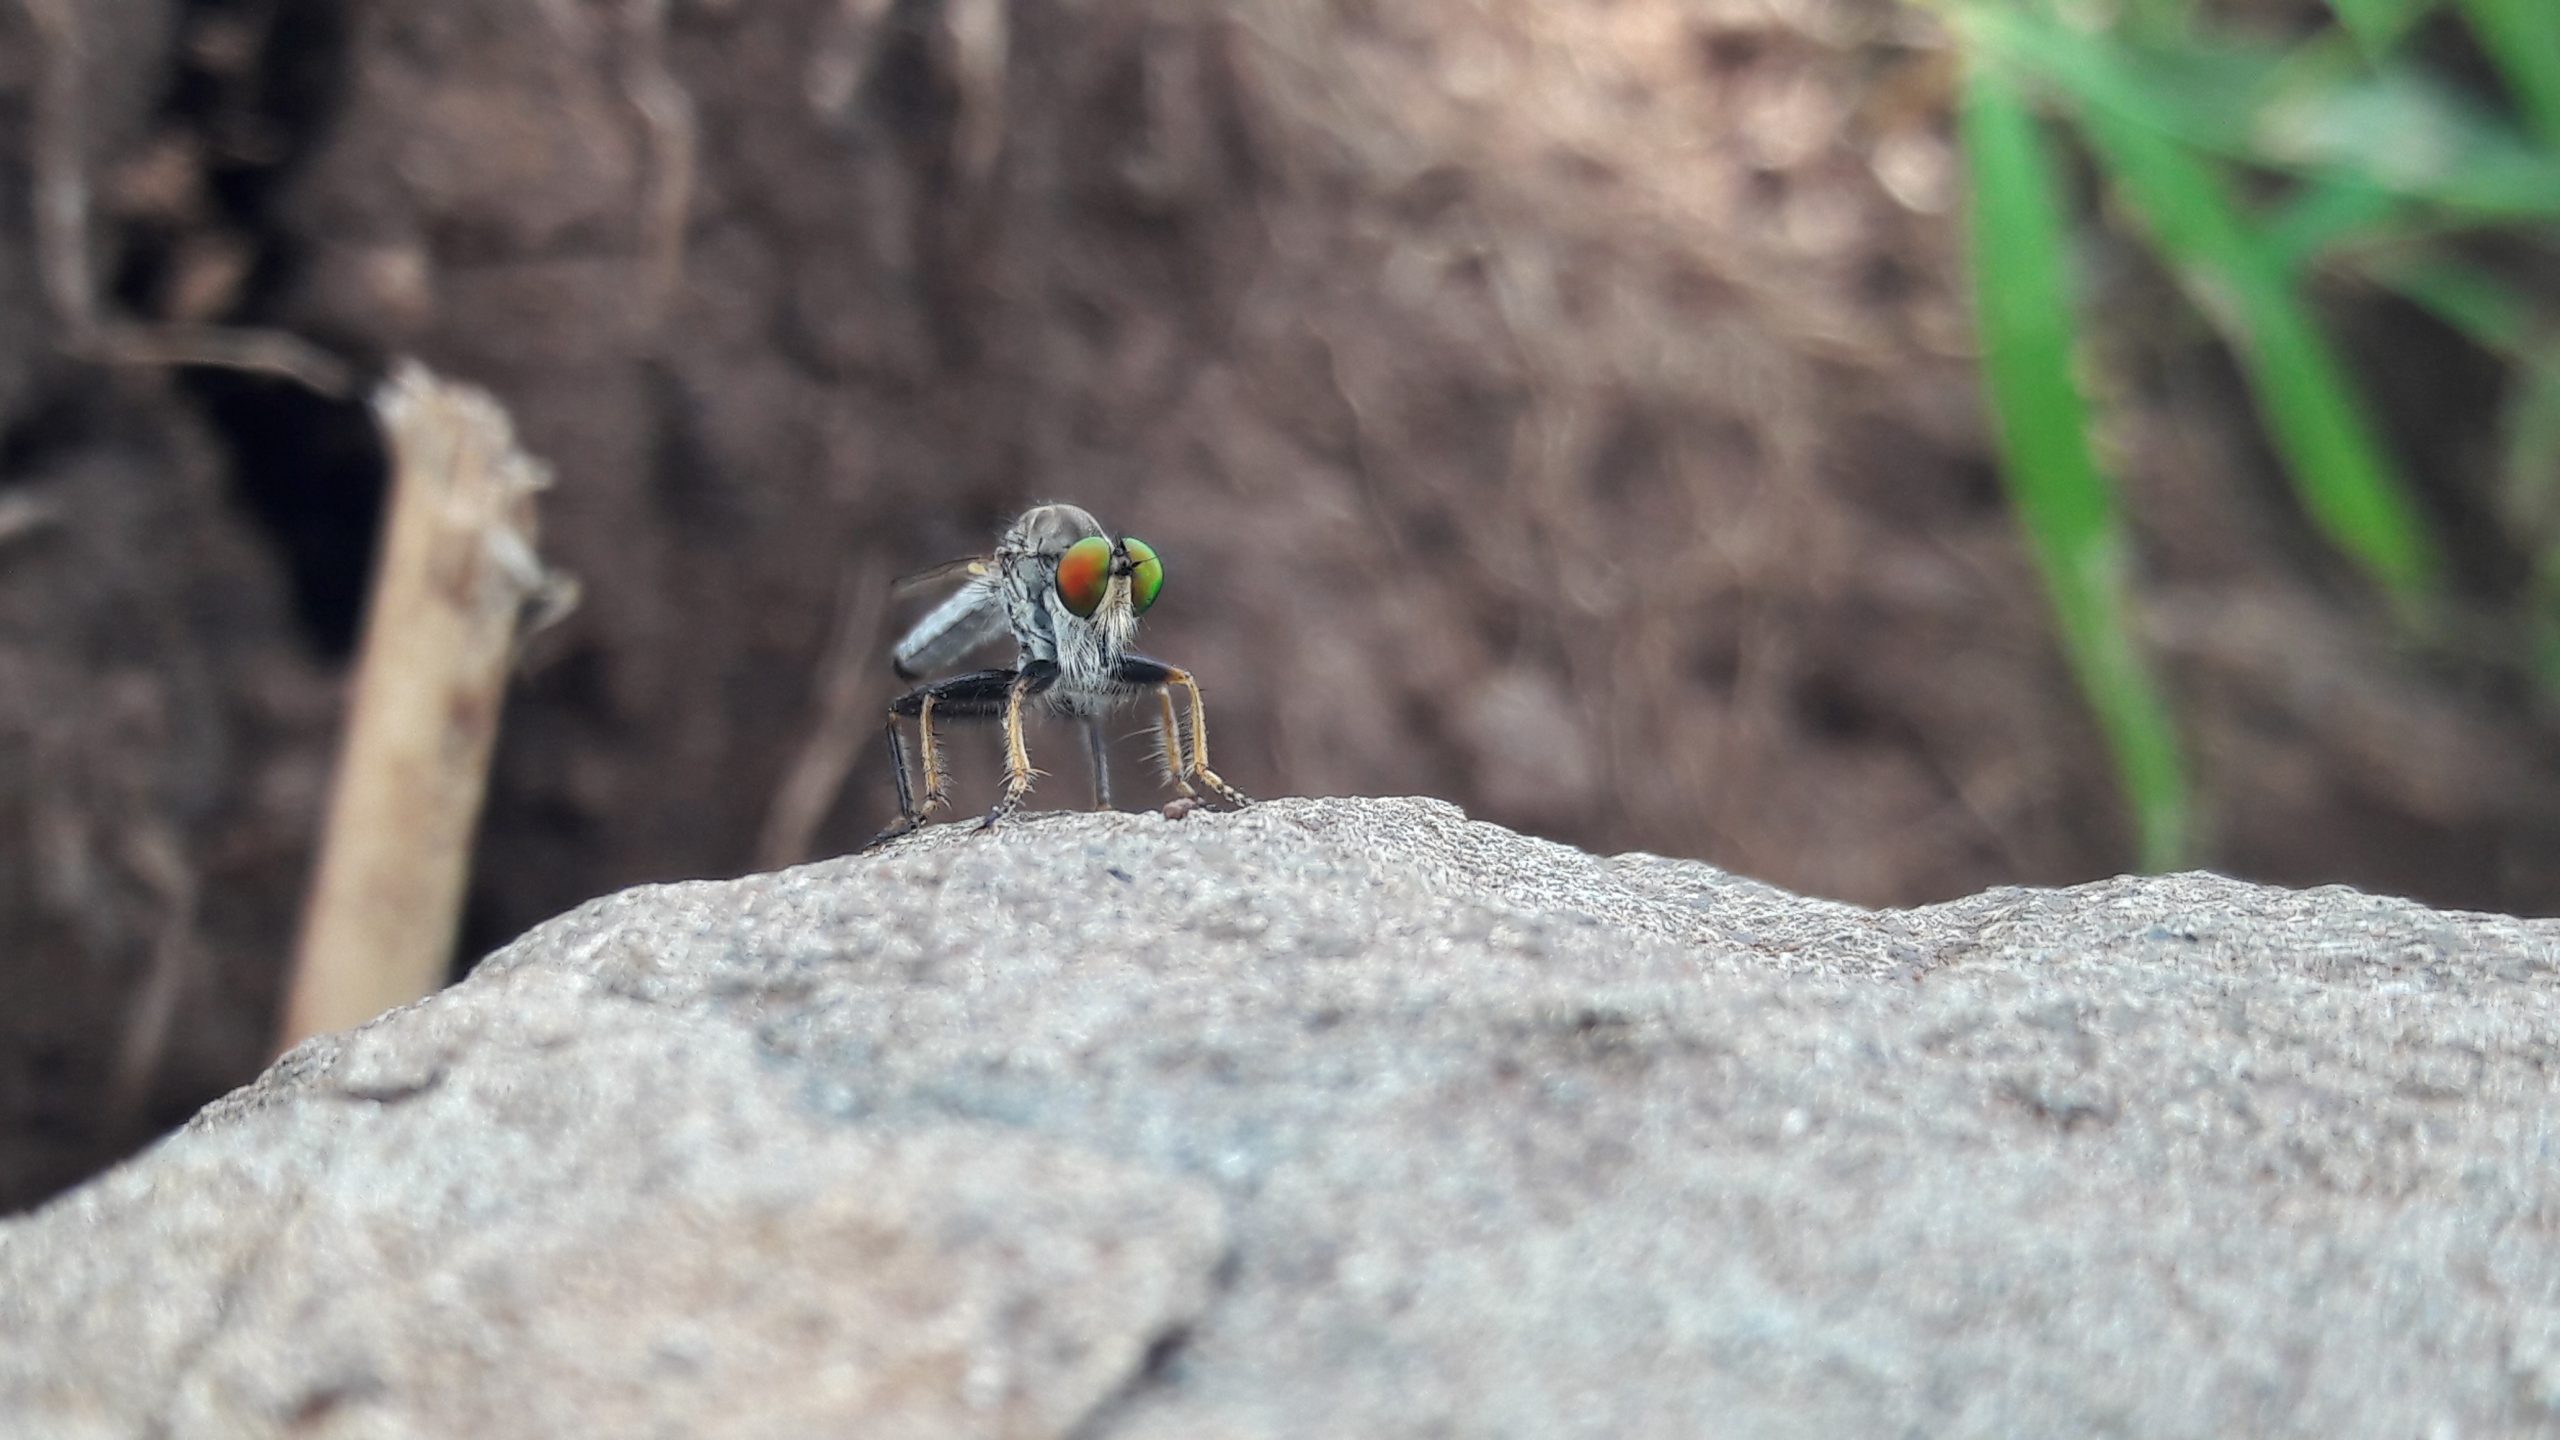 Fruit fly with gradient eyes sitting on a rock